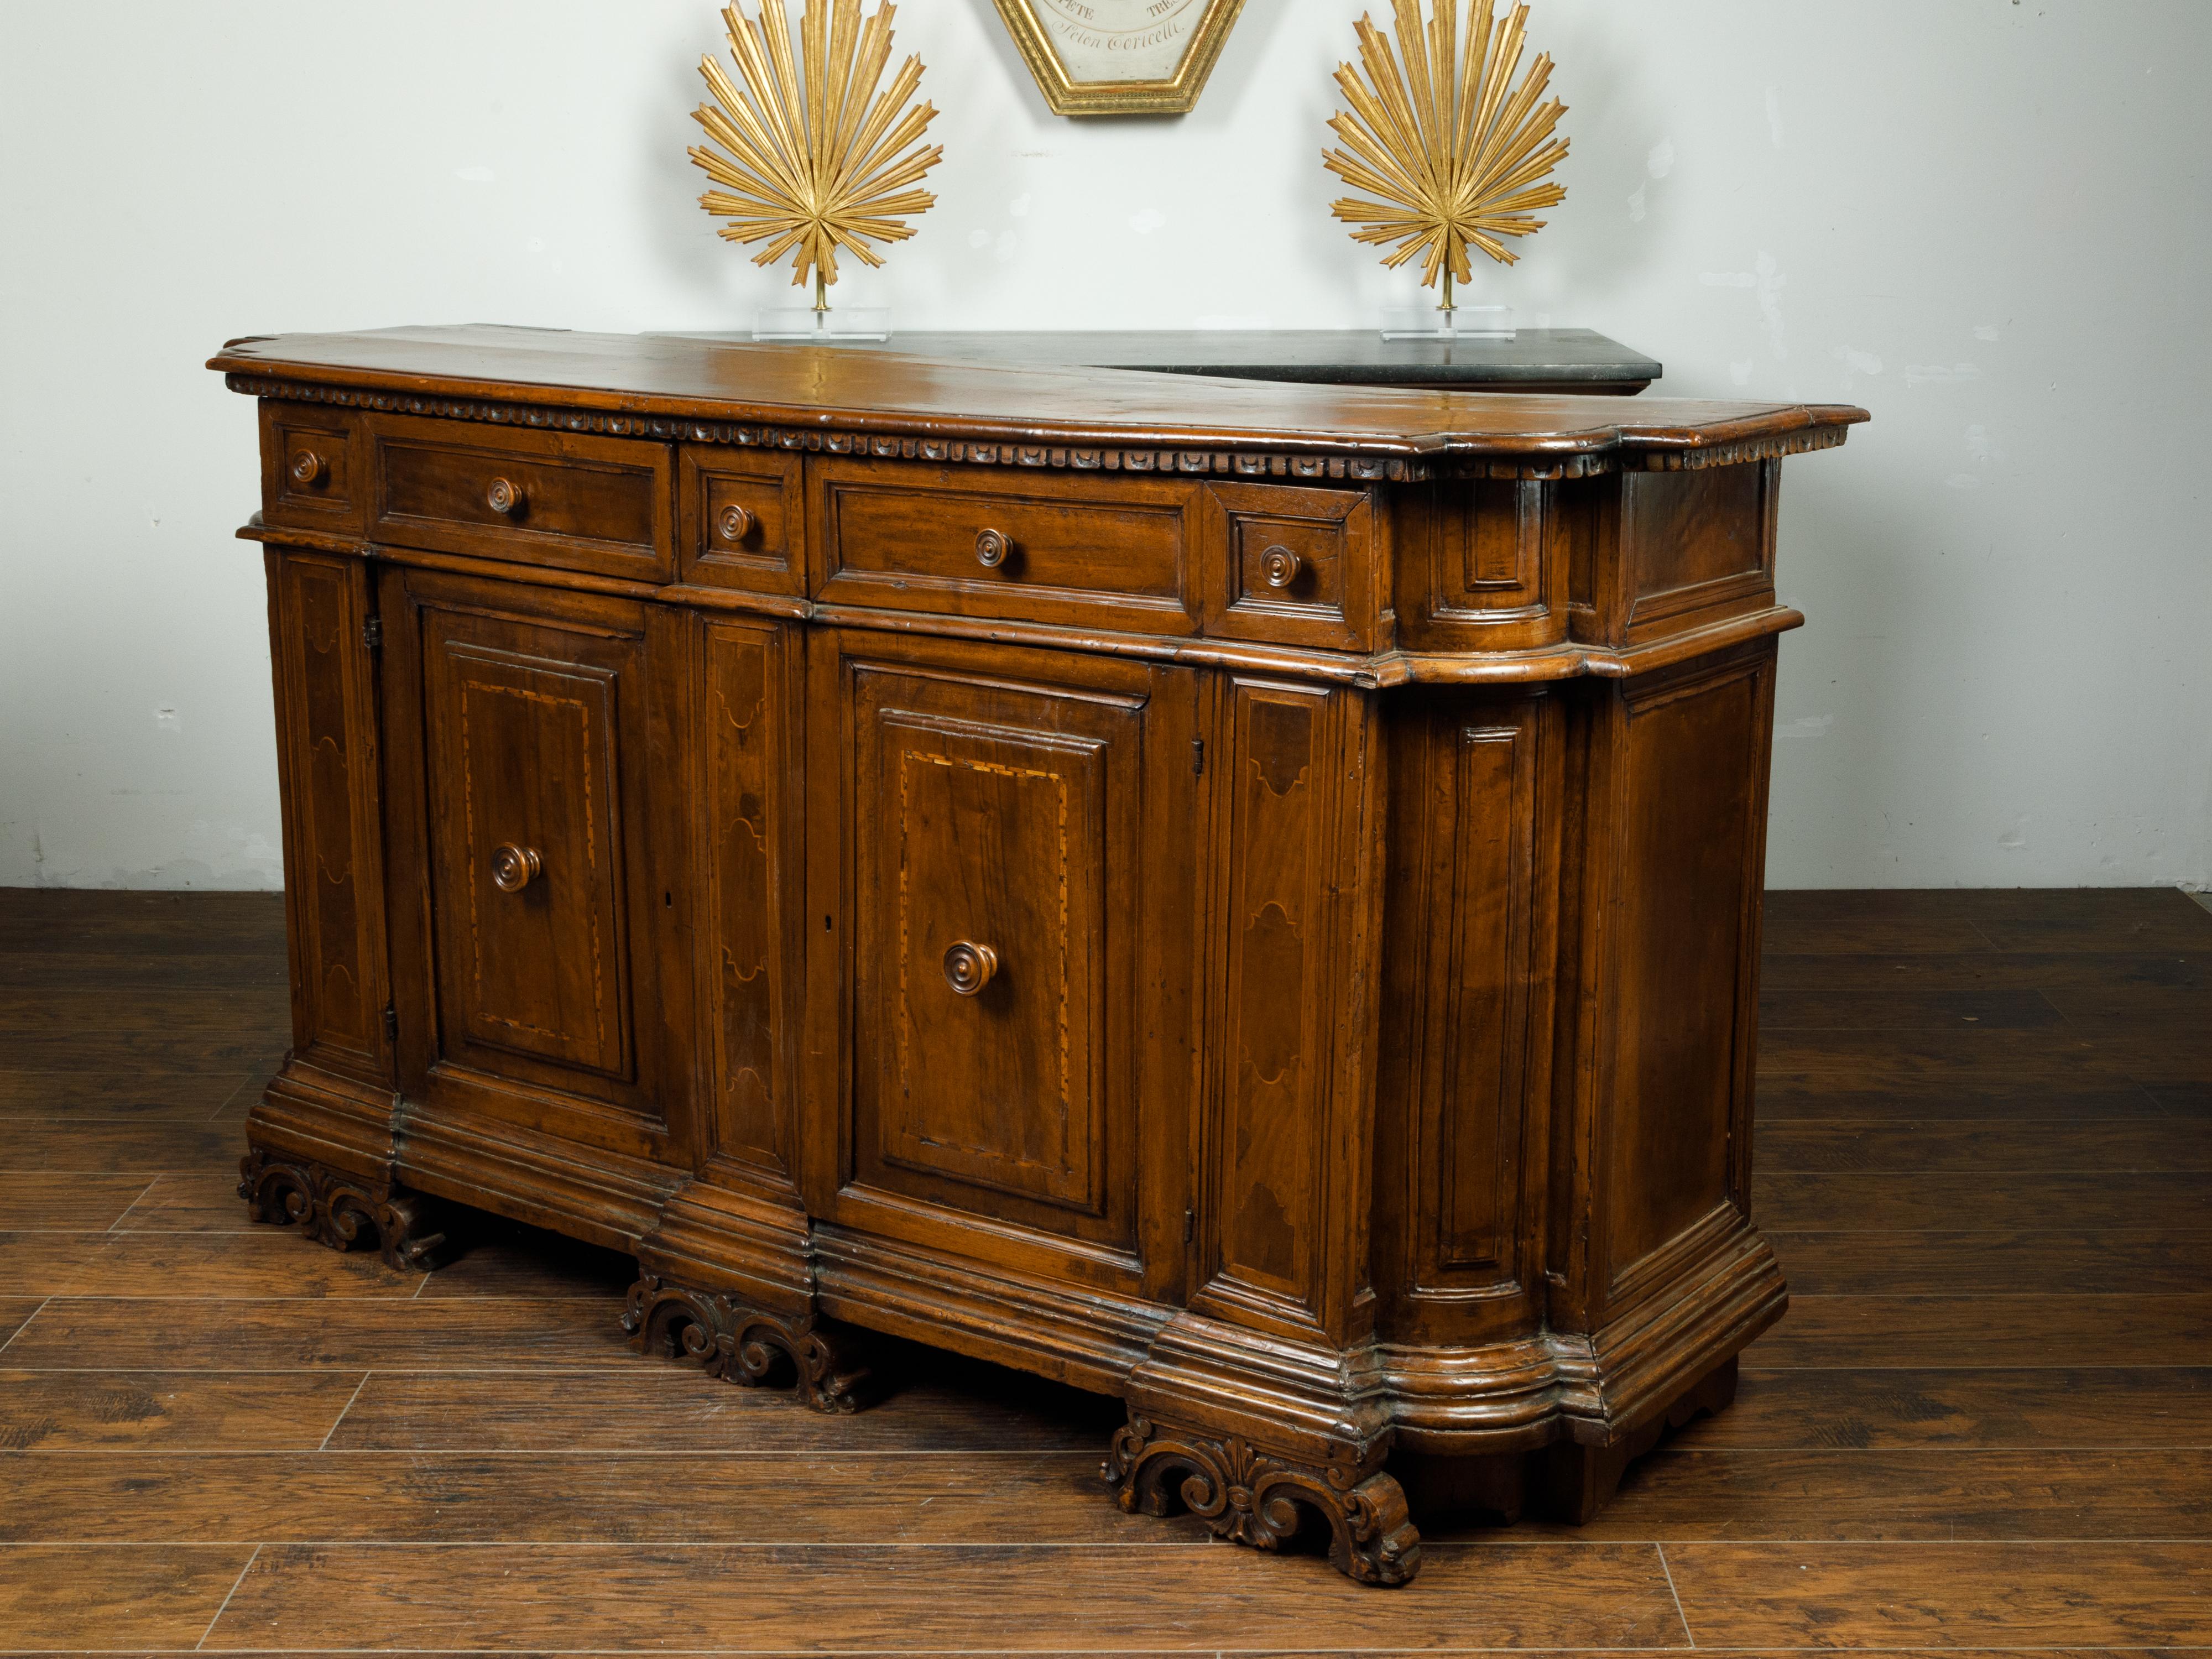 Italian 1800s Walnut Credenza with Drawers, Doors, Inlay and Foliage Carved Feet In Good Condition For Sale In Atlanta, GA